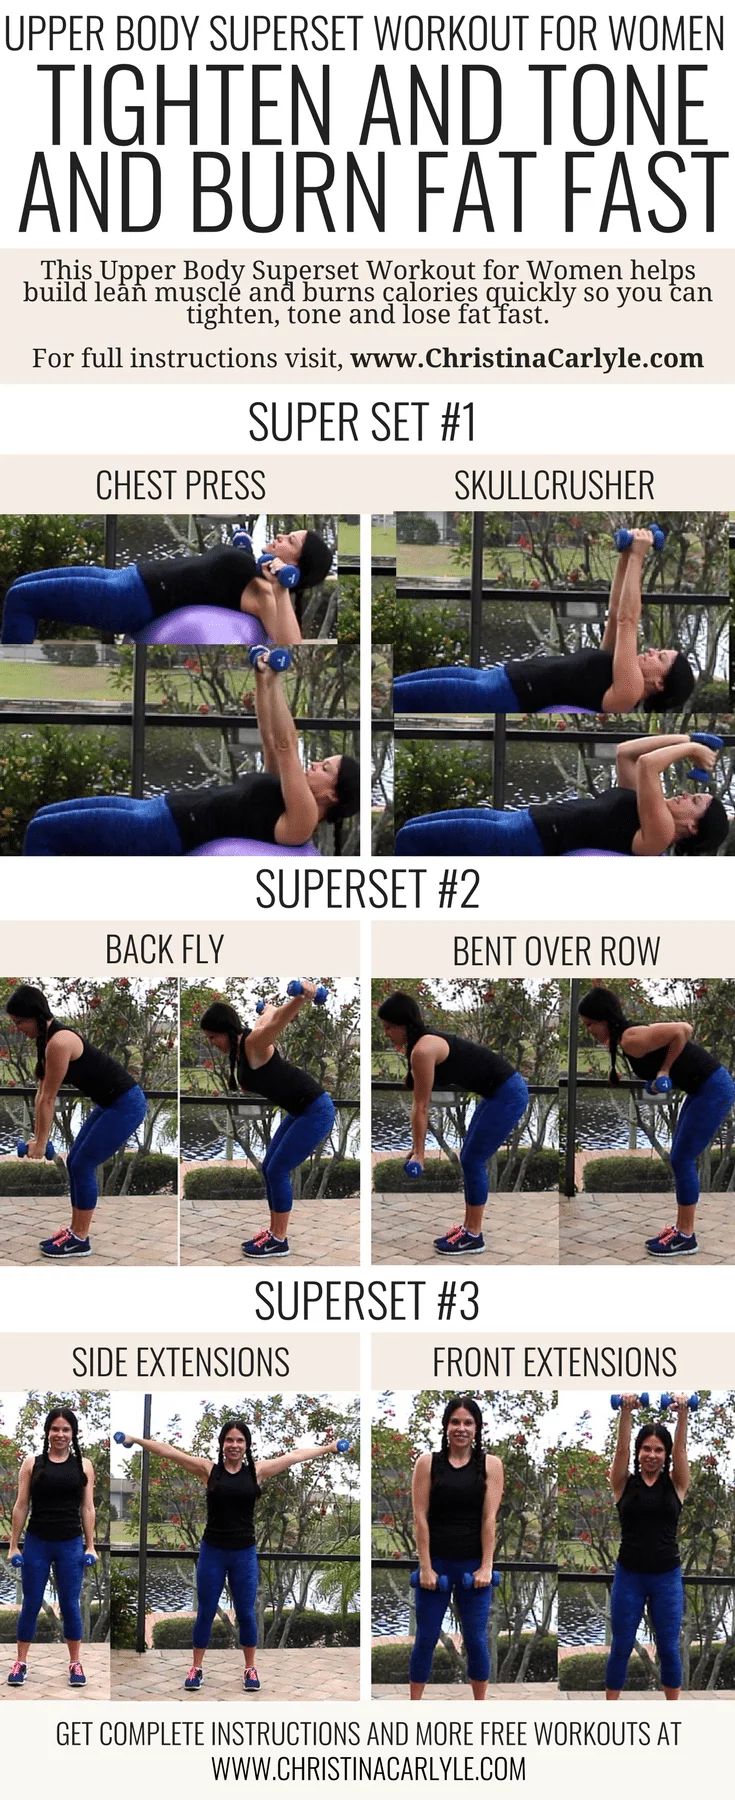 5 Fun Fat Burning Superset Workout Routines for Women